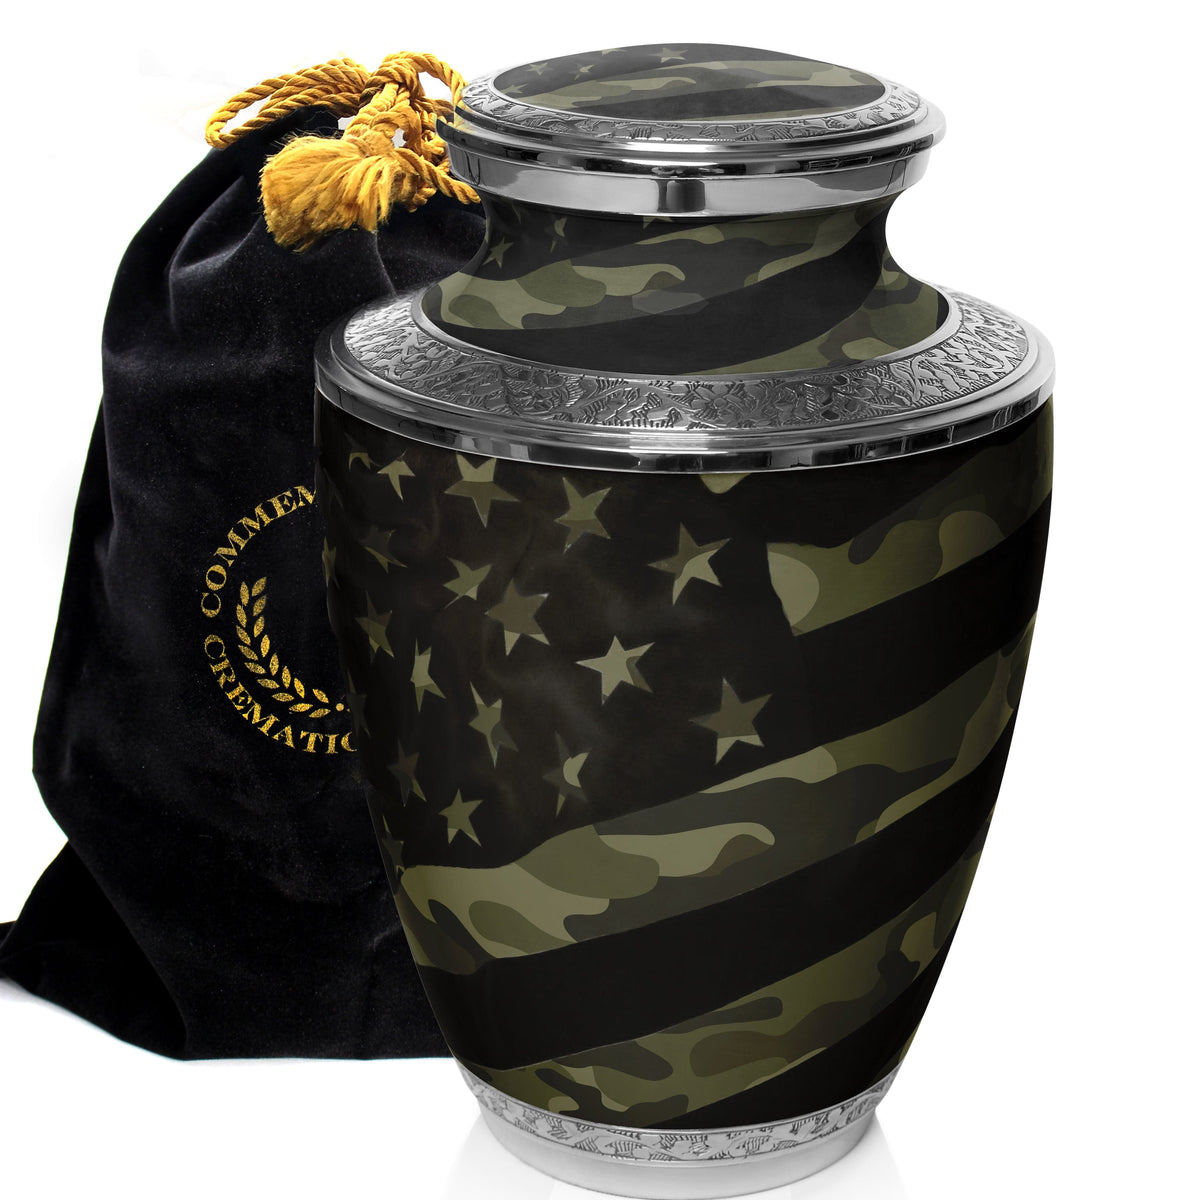 Commemorative Cremation Urns Home &amp; Garden Traditional Camouflage Flag Military Cremation Urn